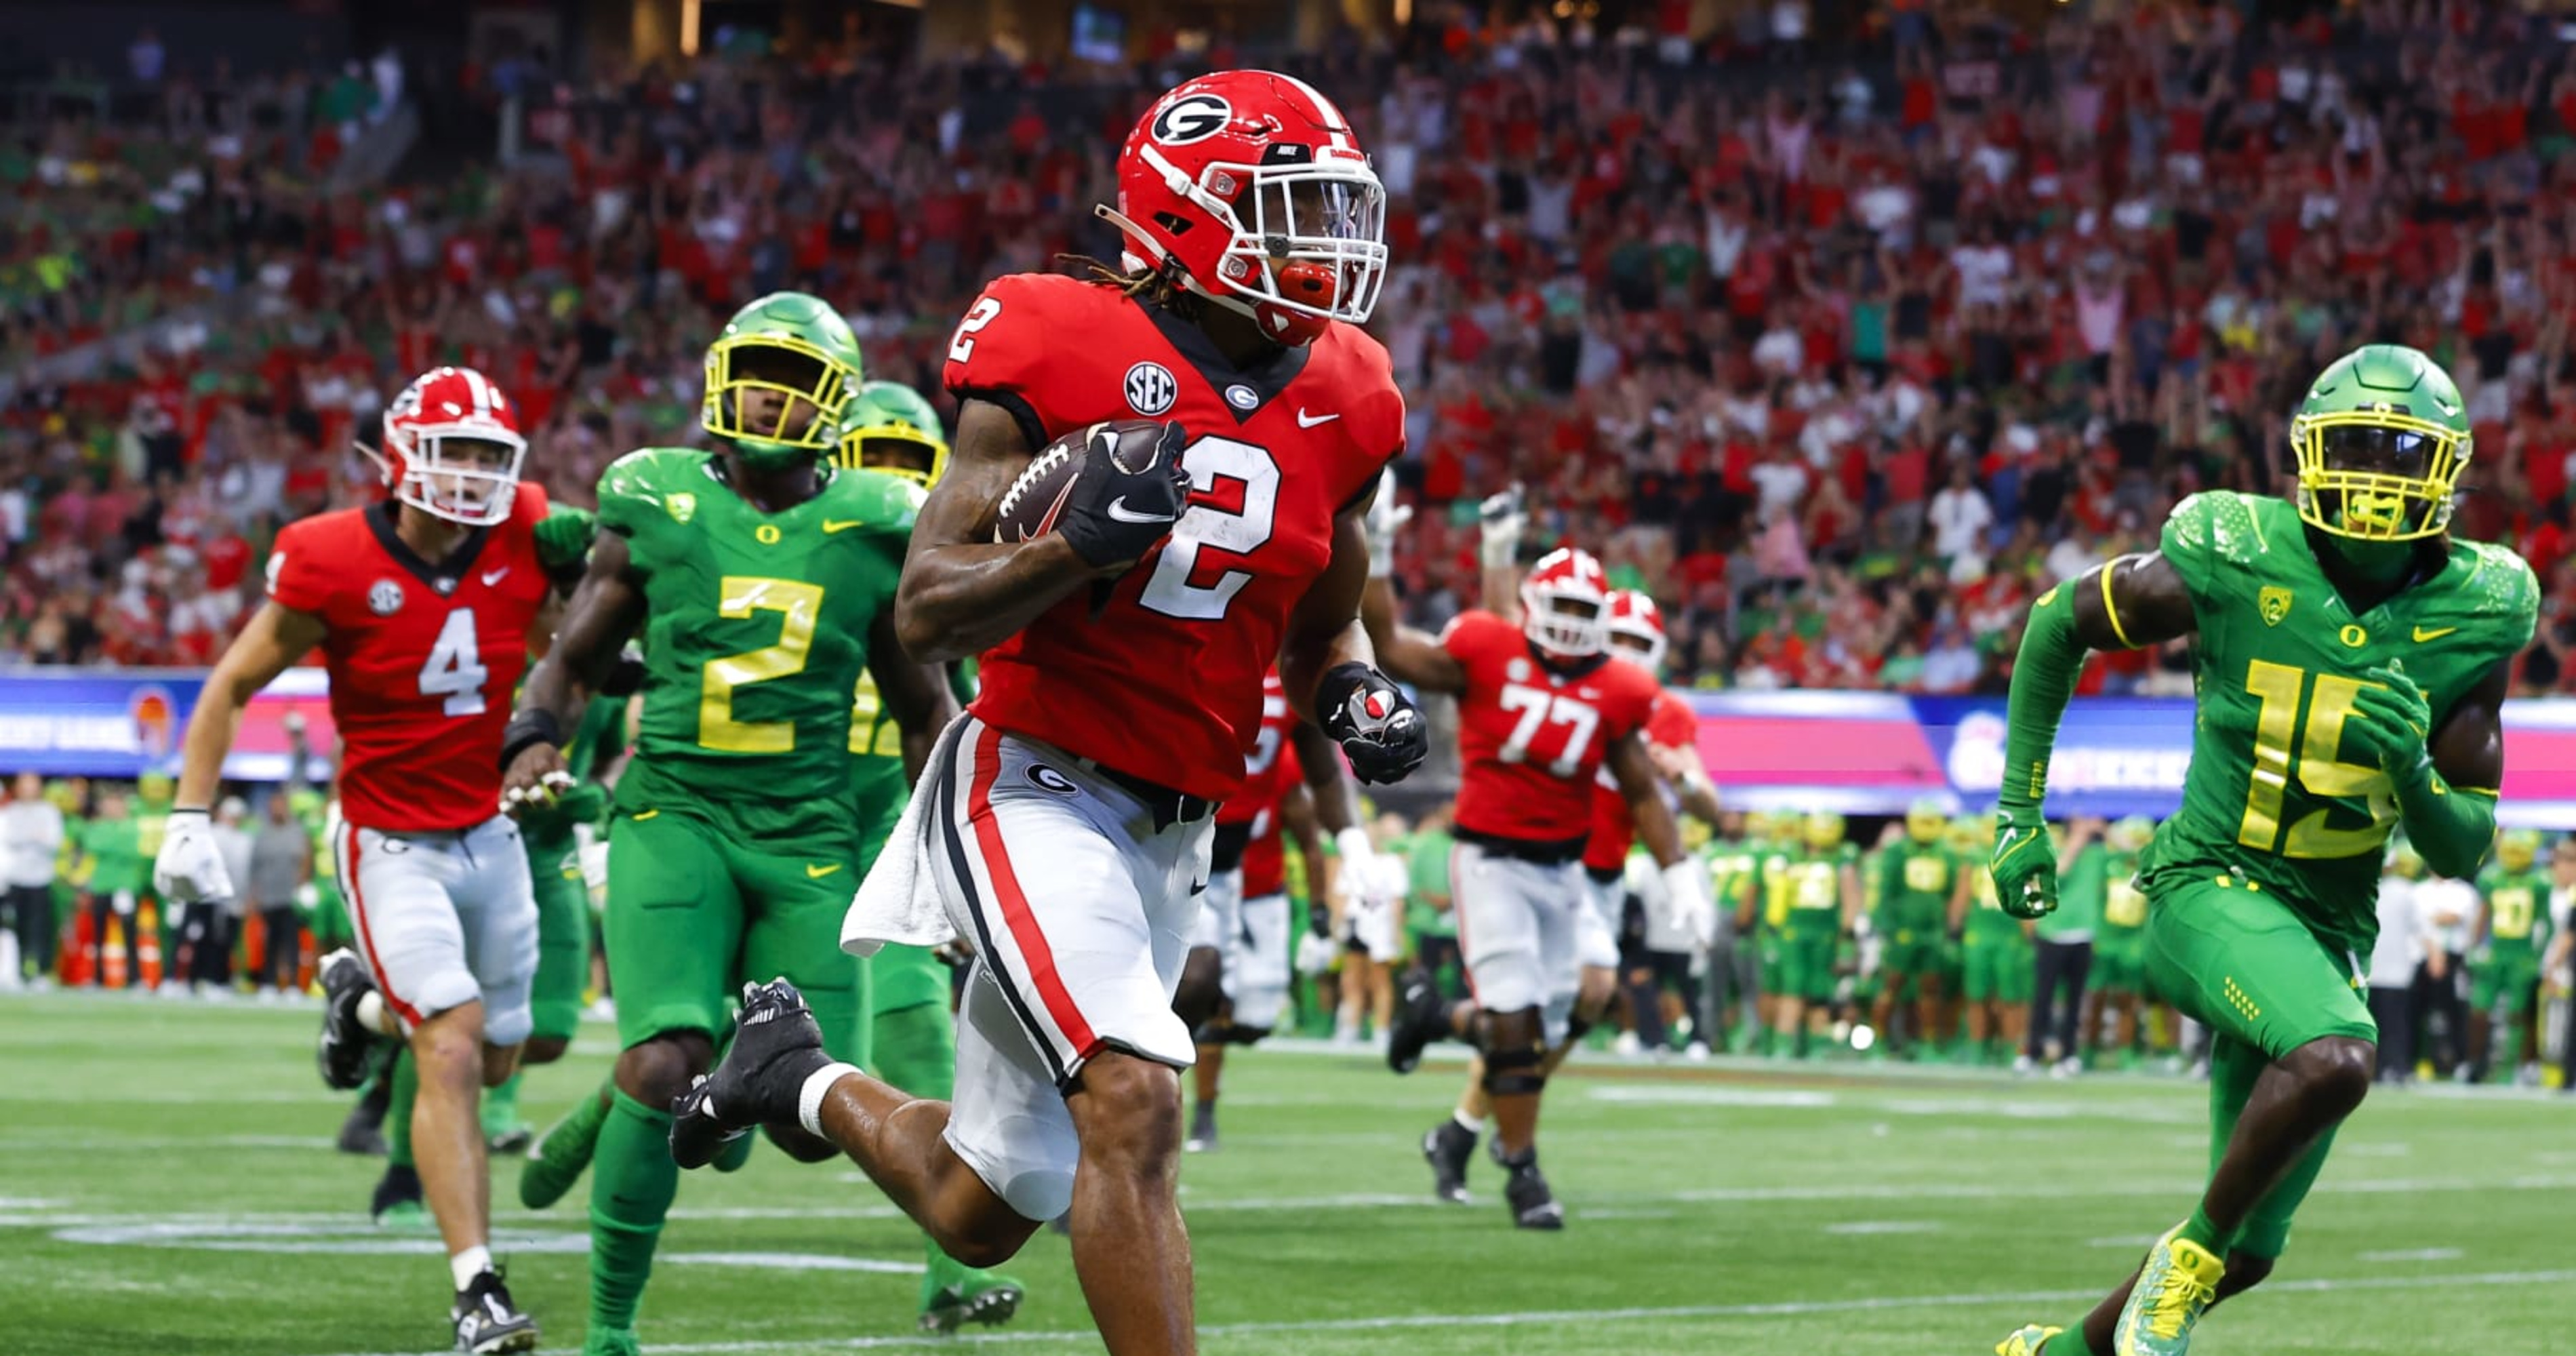 Georgia's Title Defense Starts with a Terrifying Rout of Oregon